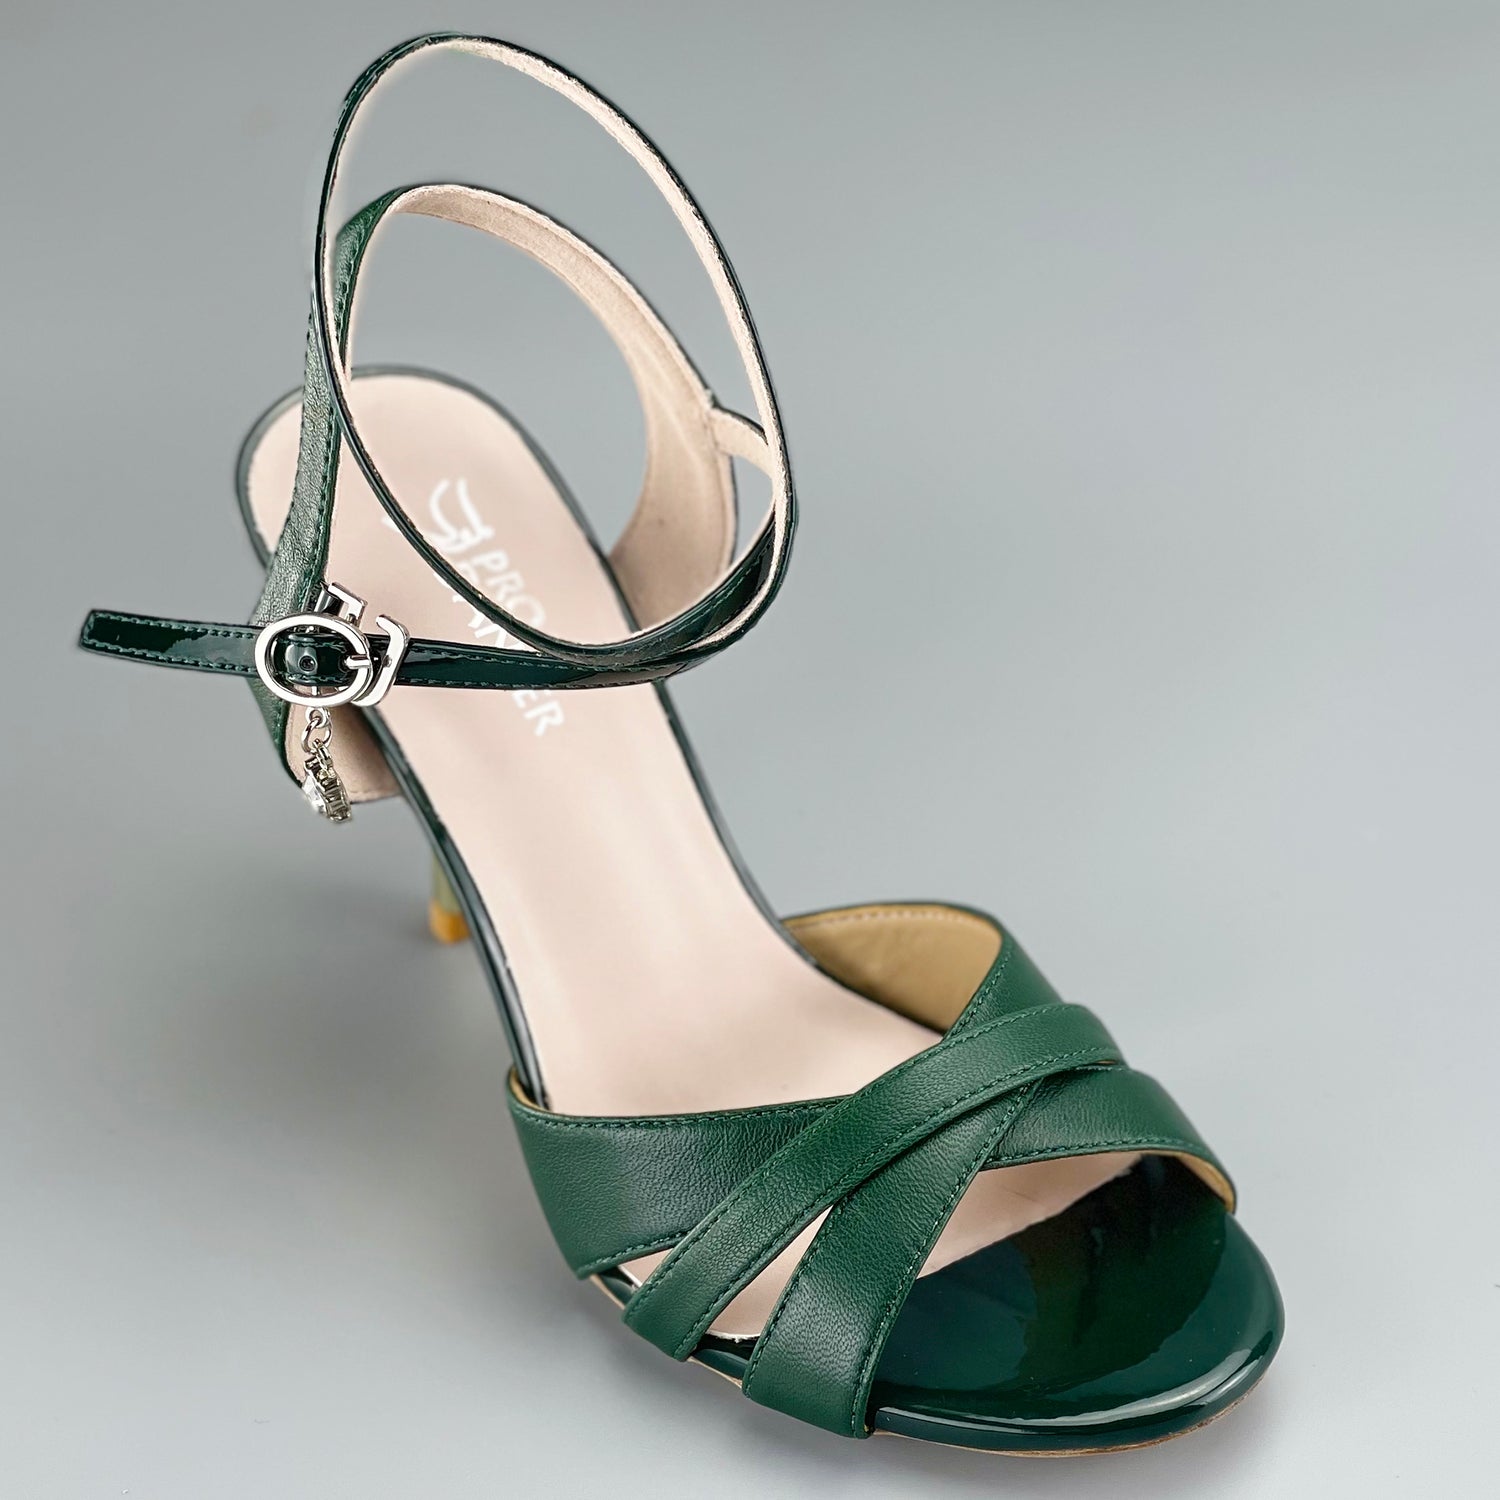 Pro Dancer Peep-toe Argentine Tango Shoes with Closed-back High Heels and Hard Leather Sole in Green1